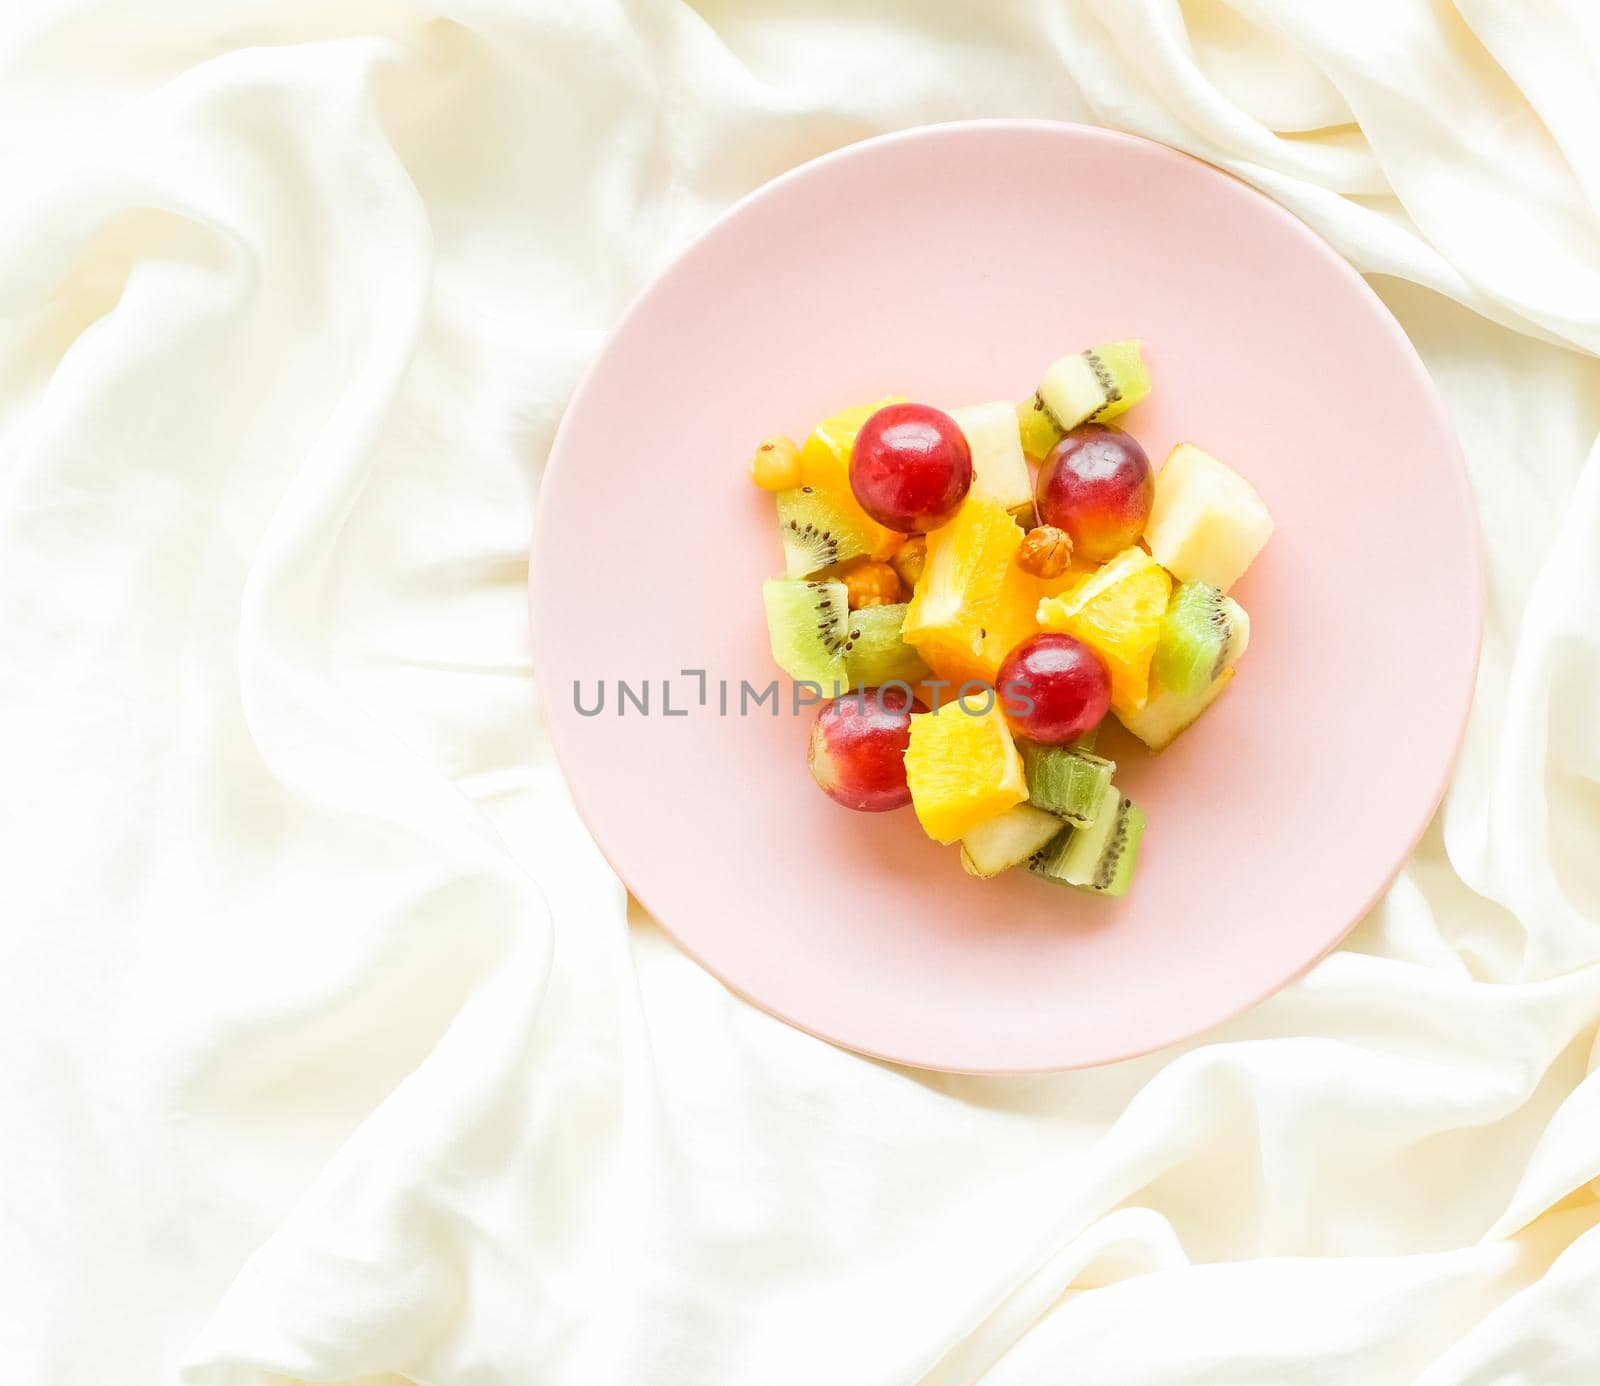 juicy fruit salad on silk, flatlay - healthy lifestyle and breakfast in bed concept by Anneleven